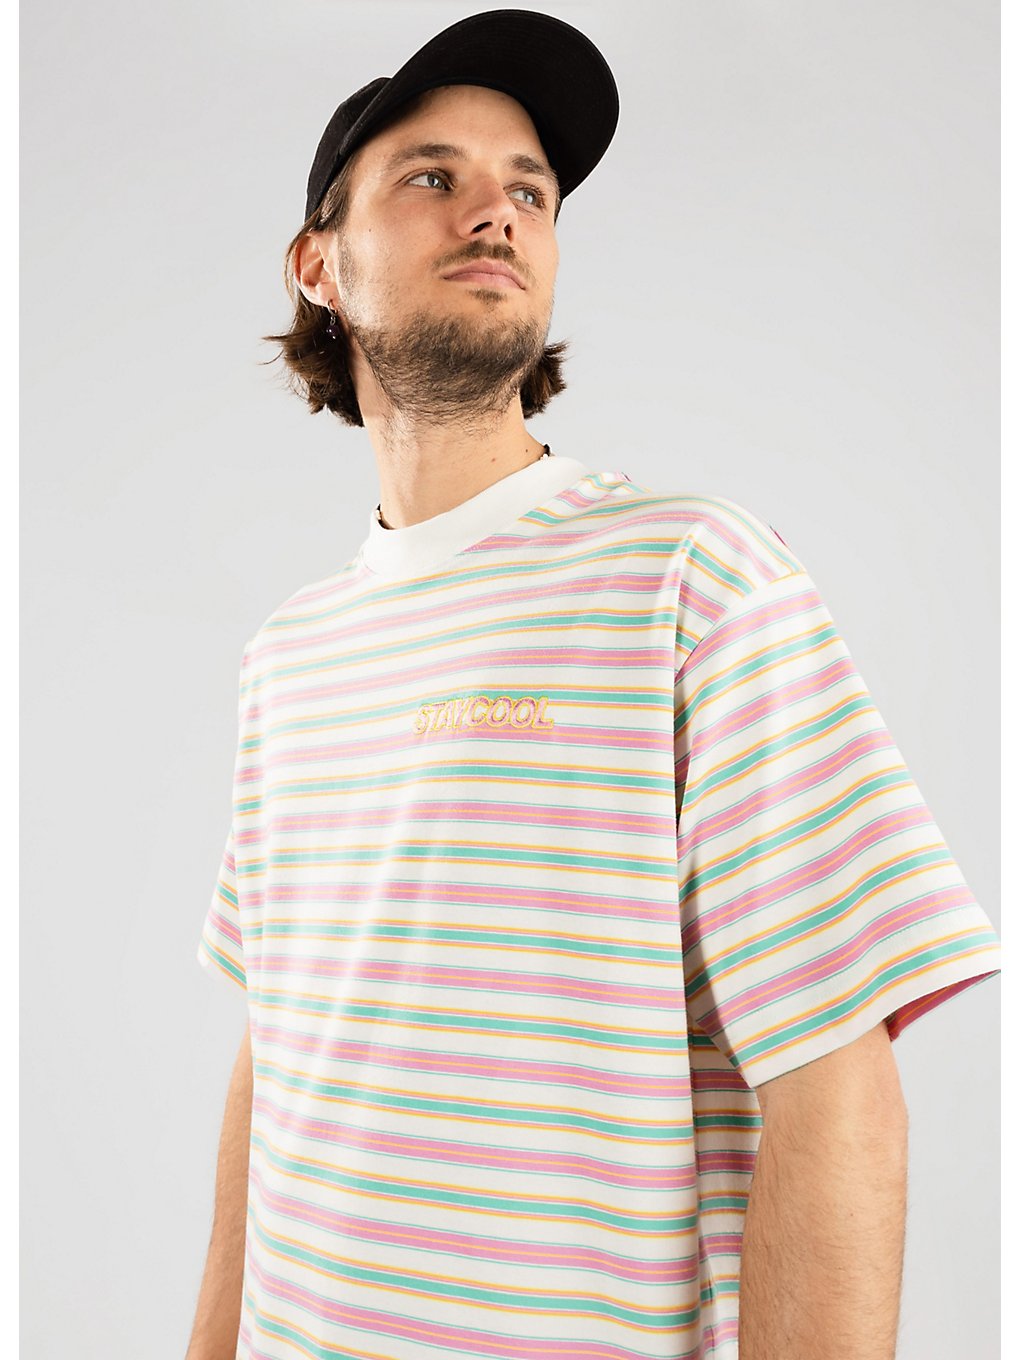 Staycoolnyc Candy Striped T-Shirt patroon